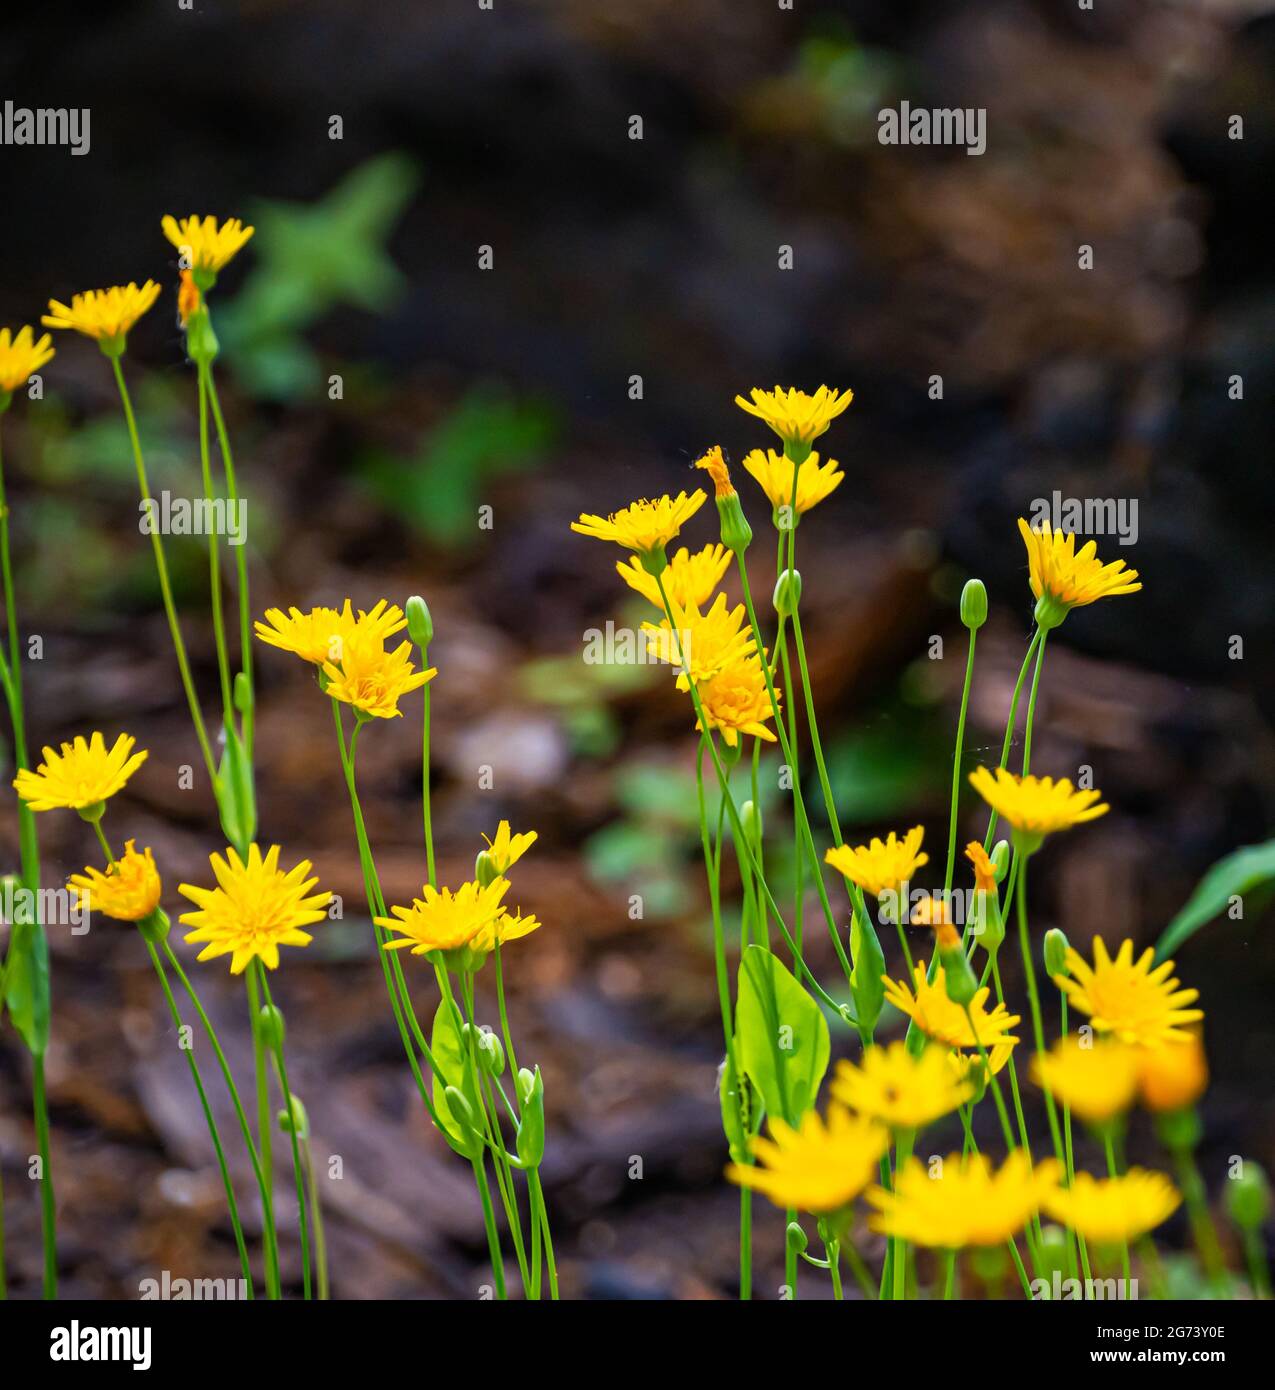 A soft focus of narrowleaf hawksbeard flowers blooming at a field Stock Photo